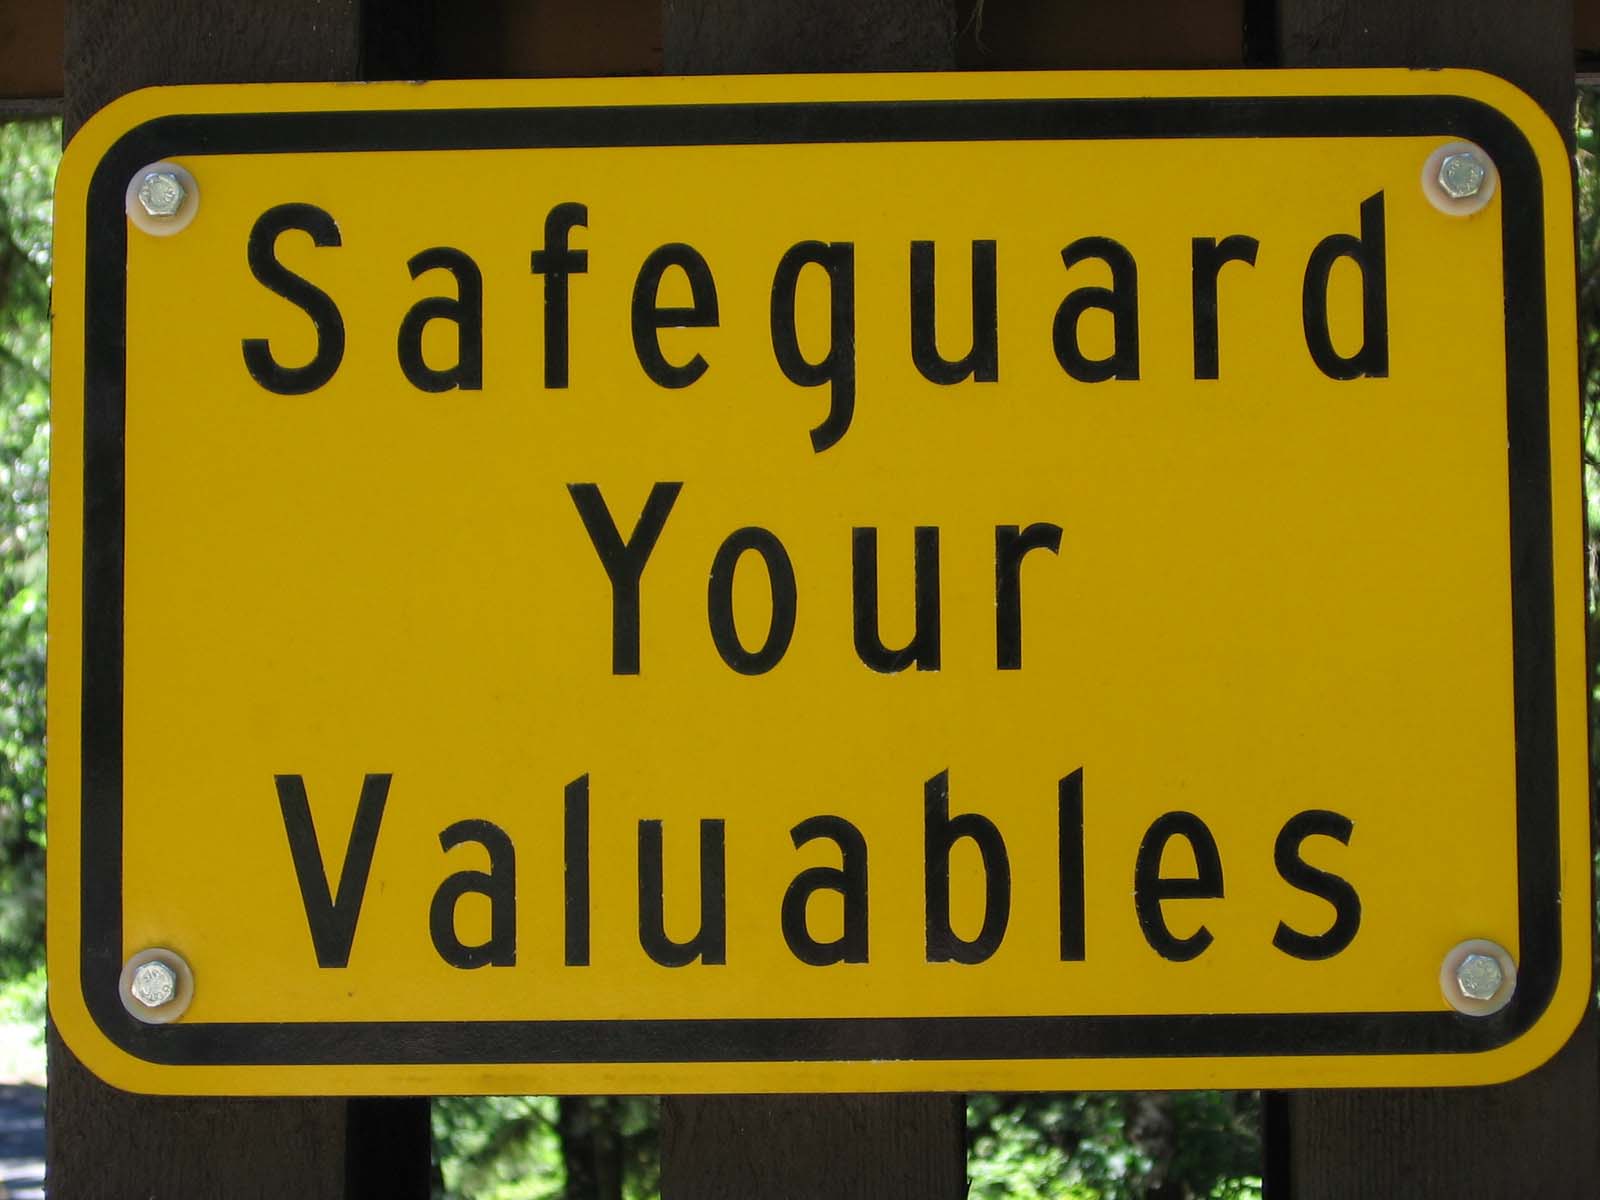 Secure your valuables